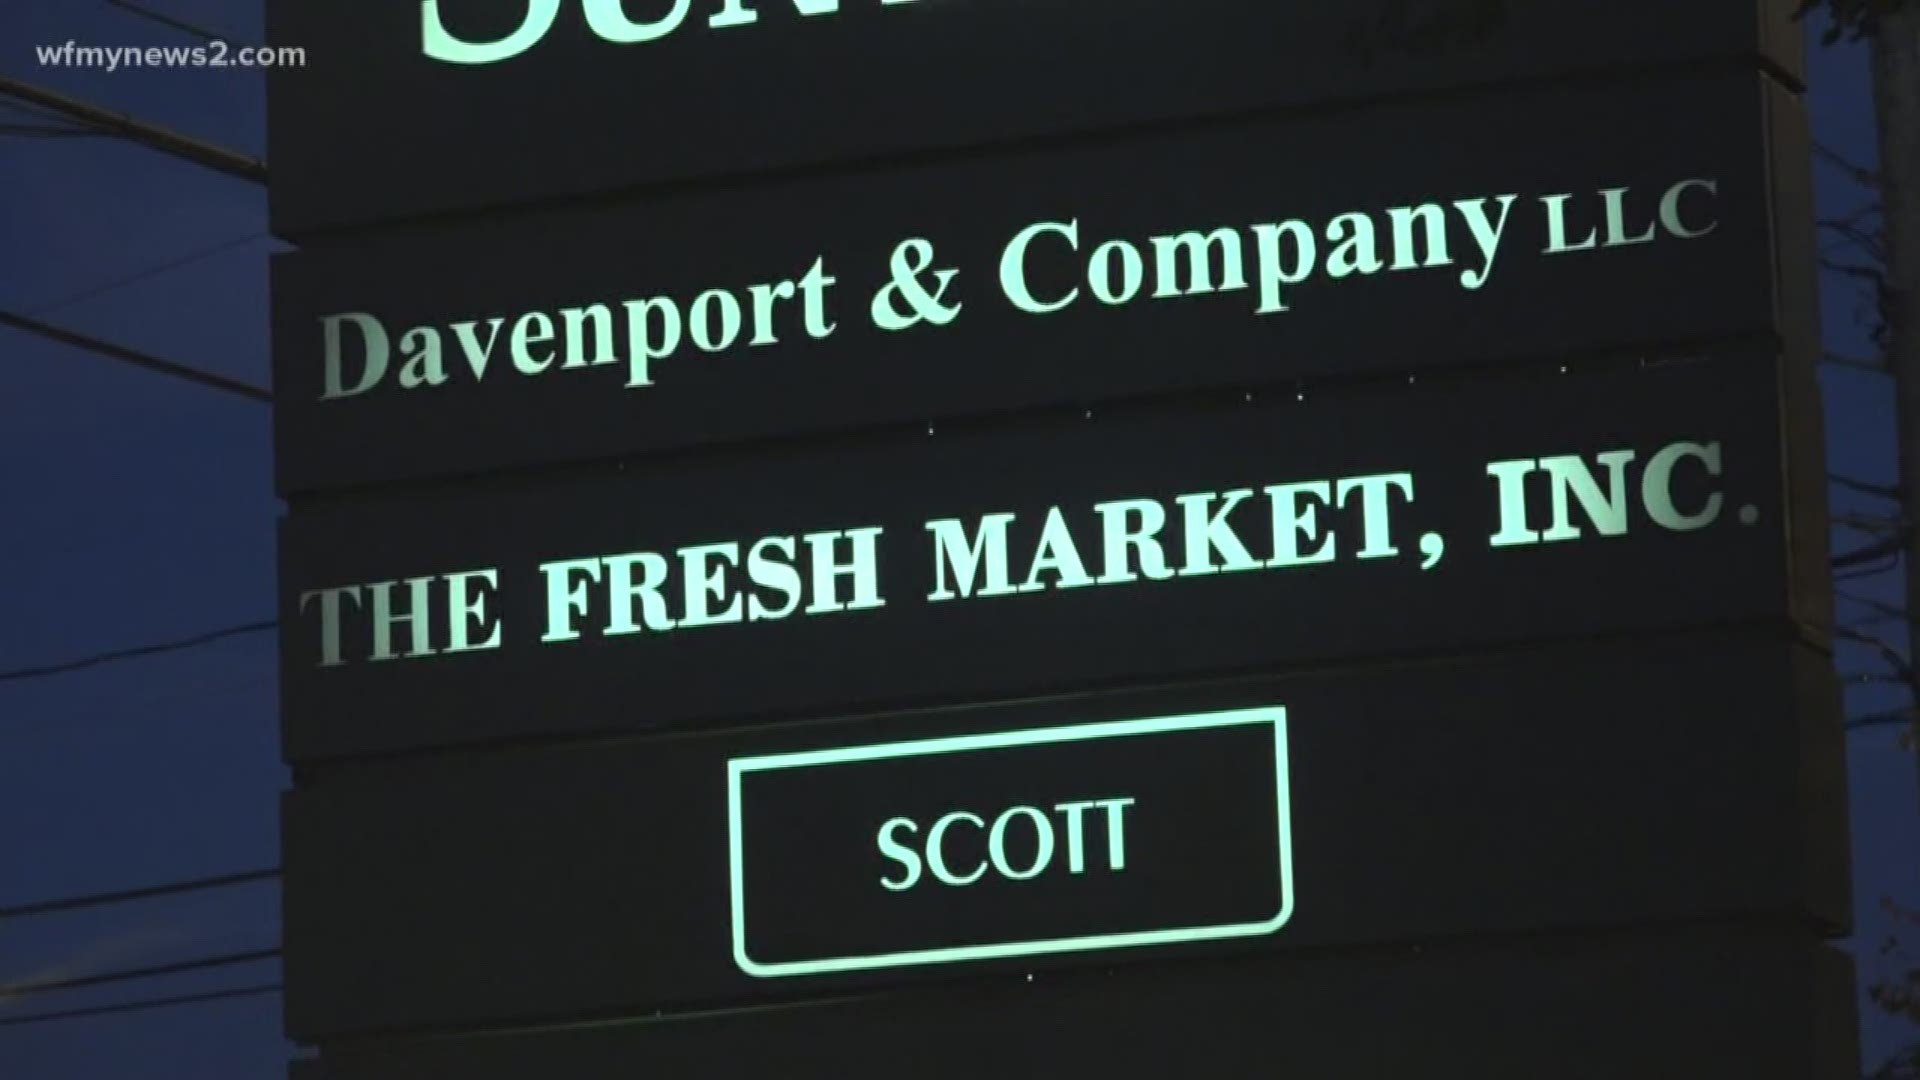 The Fresh Market was founded in Greensboro back in 1982. This week, city and county leaders will push for incentives to get the company's headquarters to stay put.